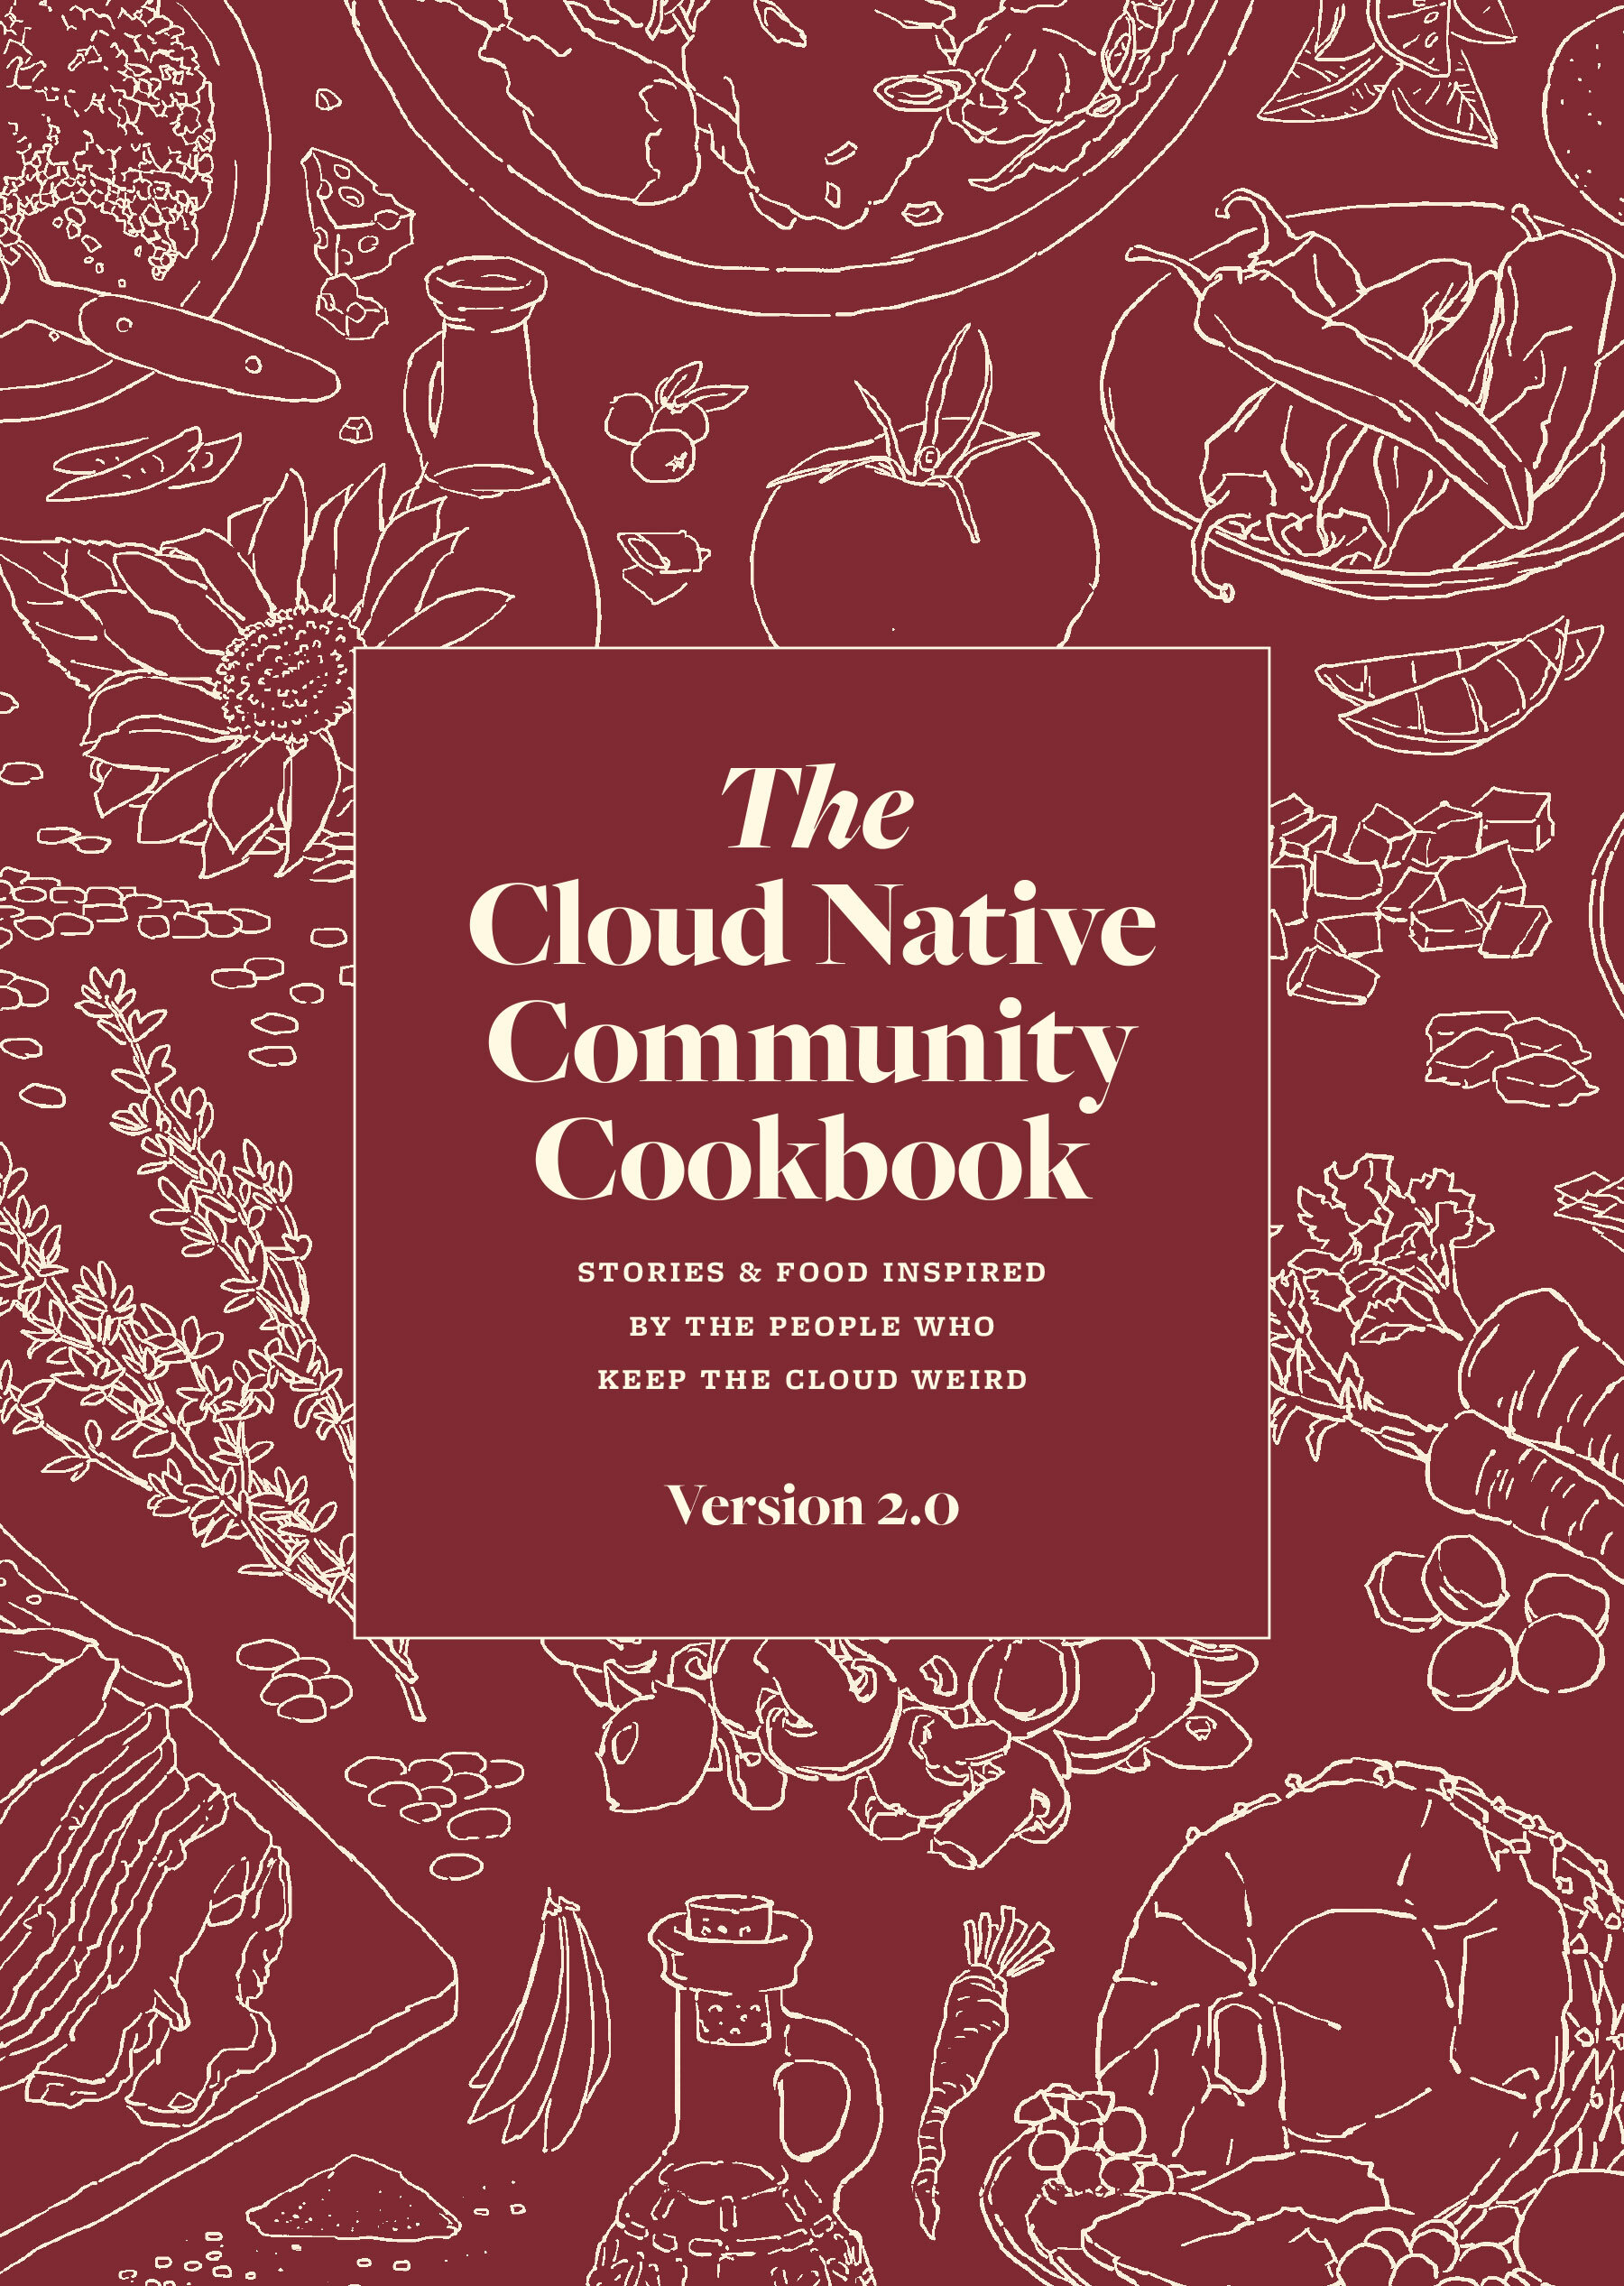 Cover of the cookbook. Version 2